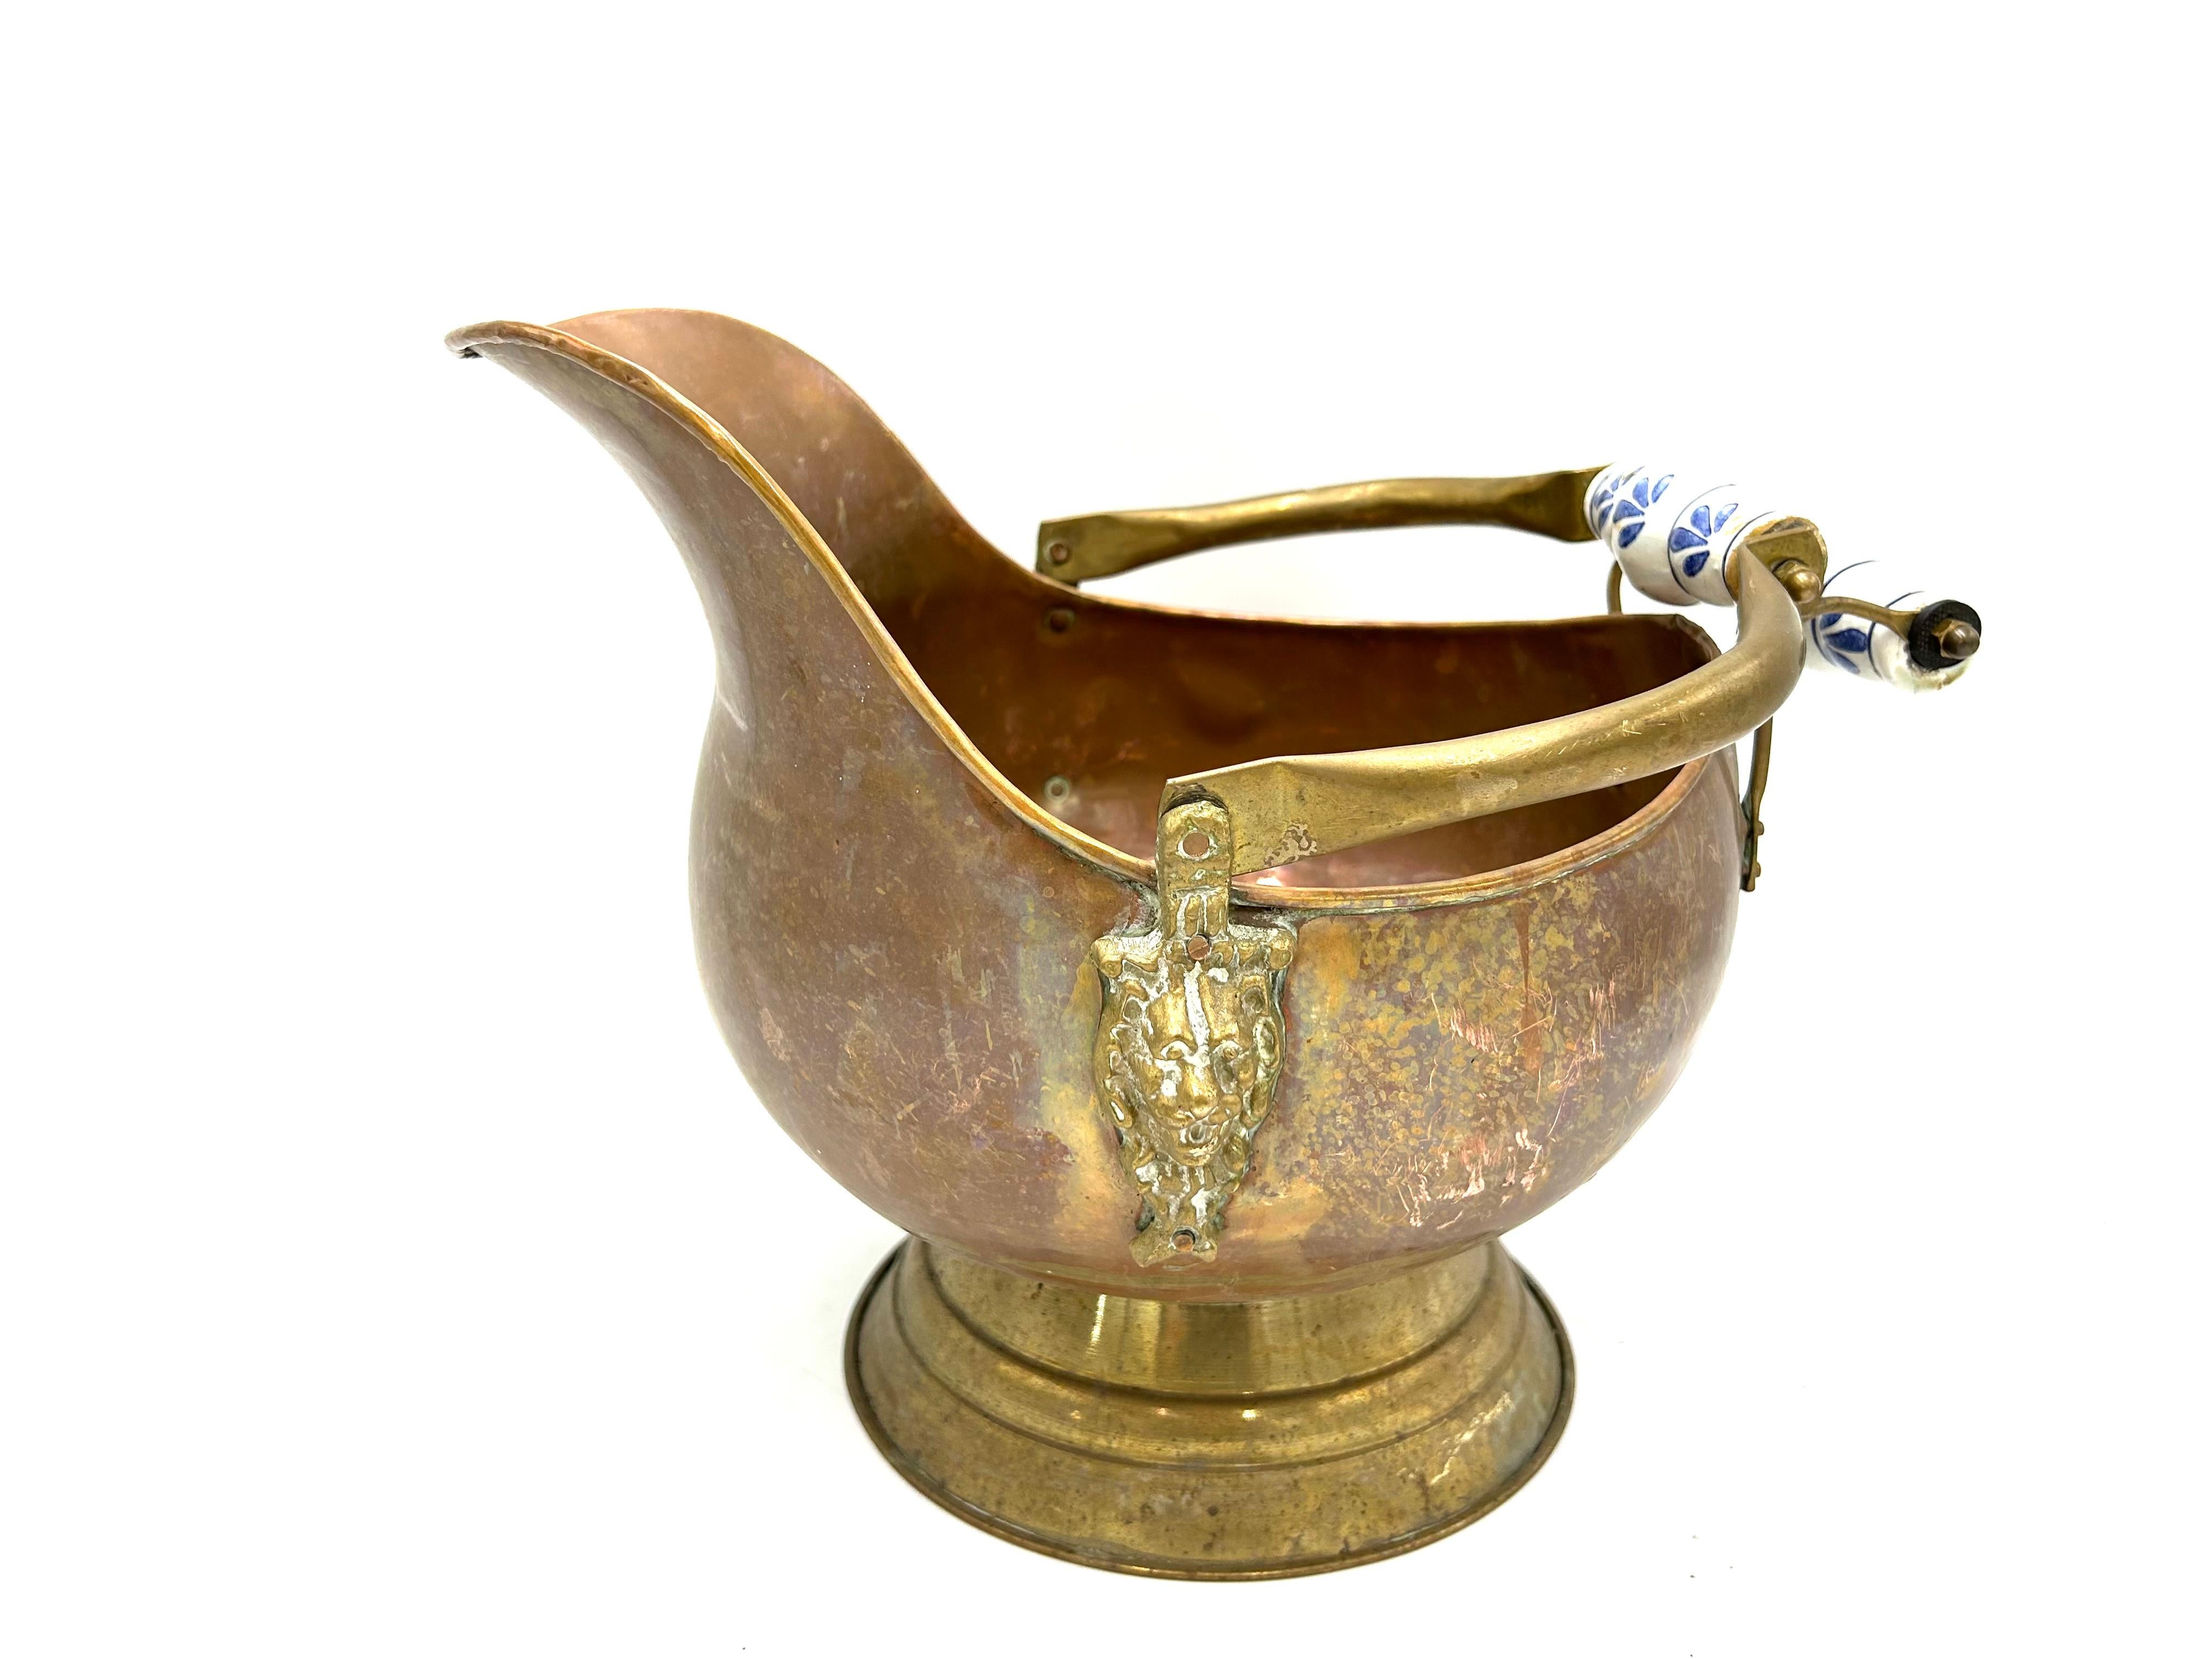 Copper vessel -pot with porcelain handles.

Very good condition, covered with patina due to age

Measures: height 27cm

width 30cm

depth 24cm.